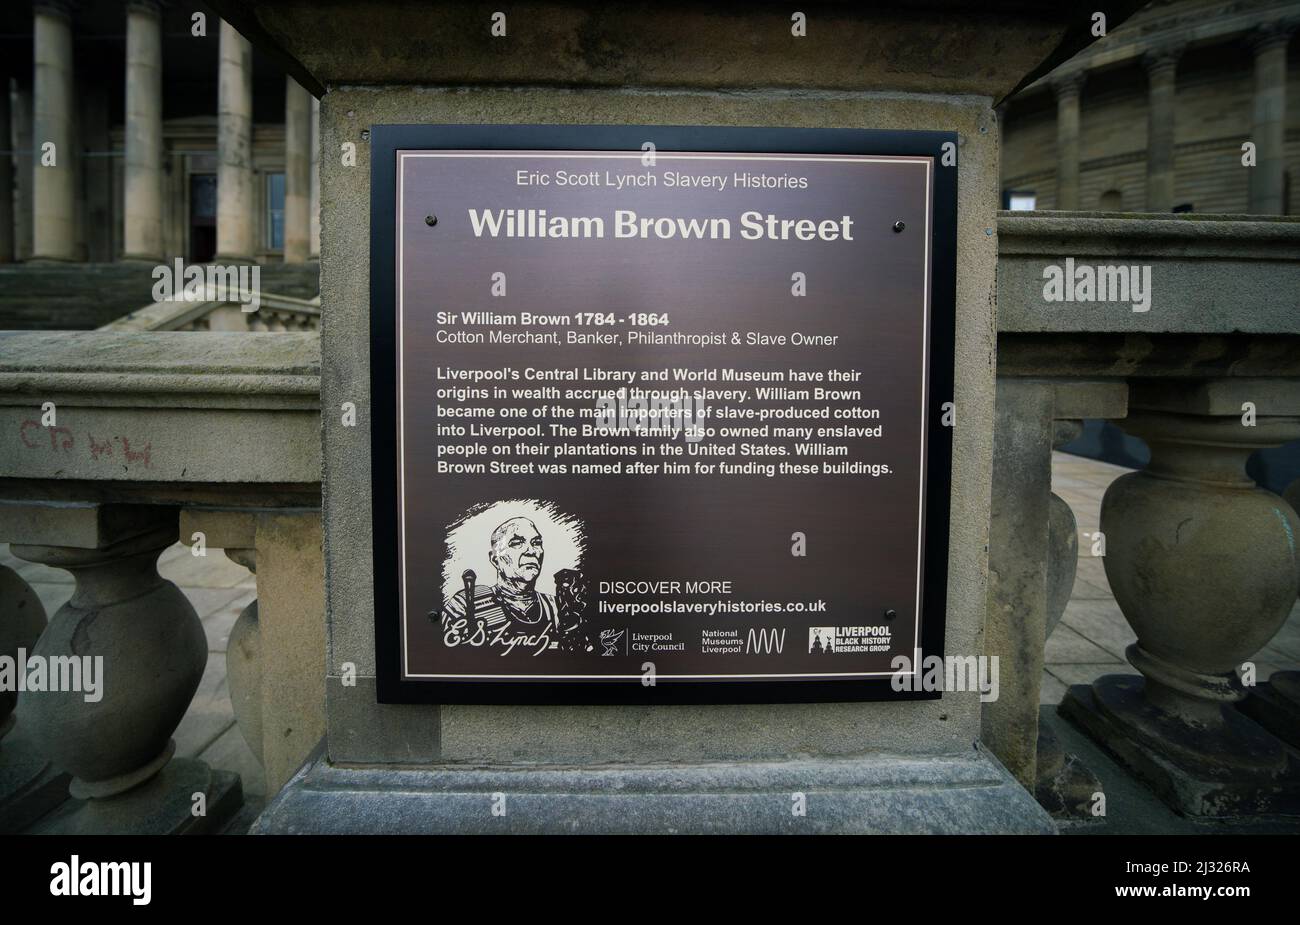 A newly unveiled bronze plaque close to the World Museum on William Brown Street, Liverpool, which explains the history behind the street name and its origins with the slave trade. It is the first of around ten streets which will become home to an 'Eric Scott Lynch Slavery Histories' plaque - named in honour of the activist and historian who passed away last year. Picture date: Tuesday April 5, 2022. Stock Photo